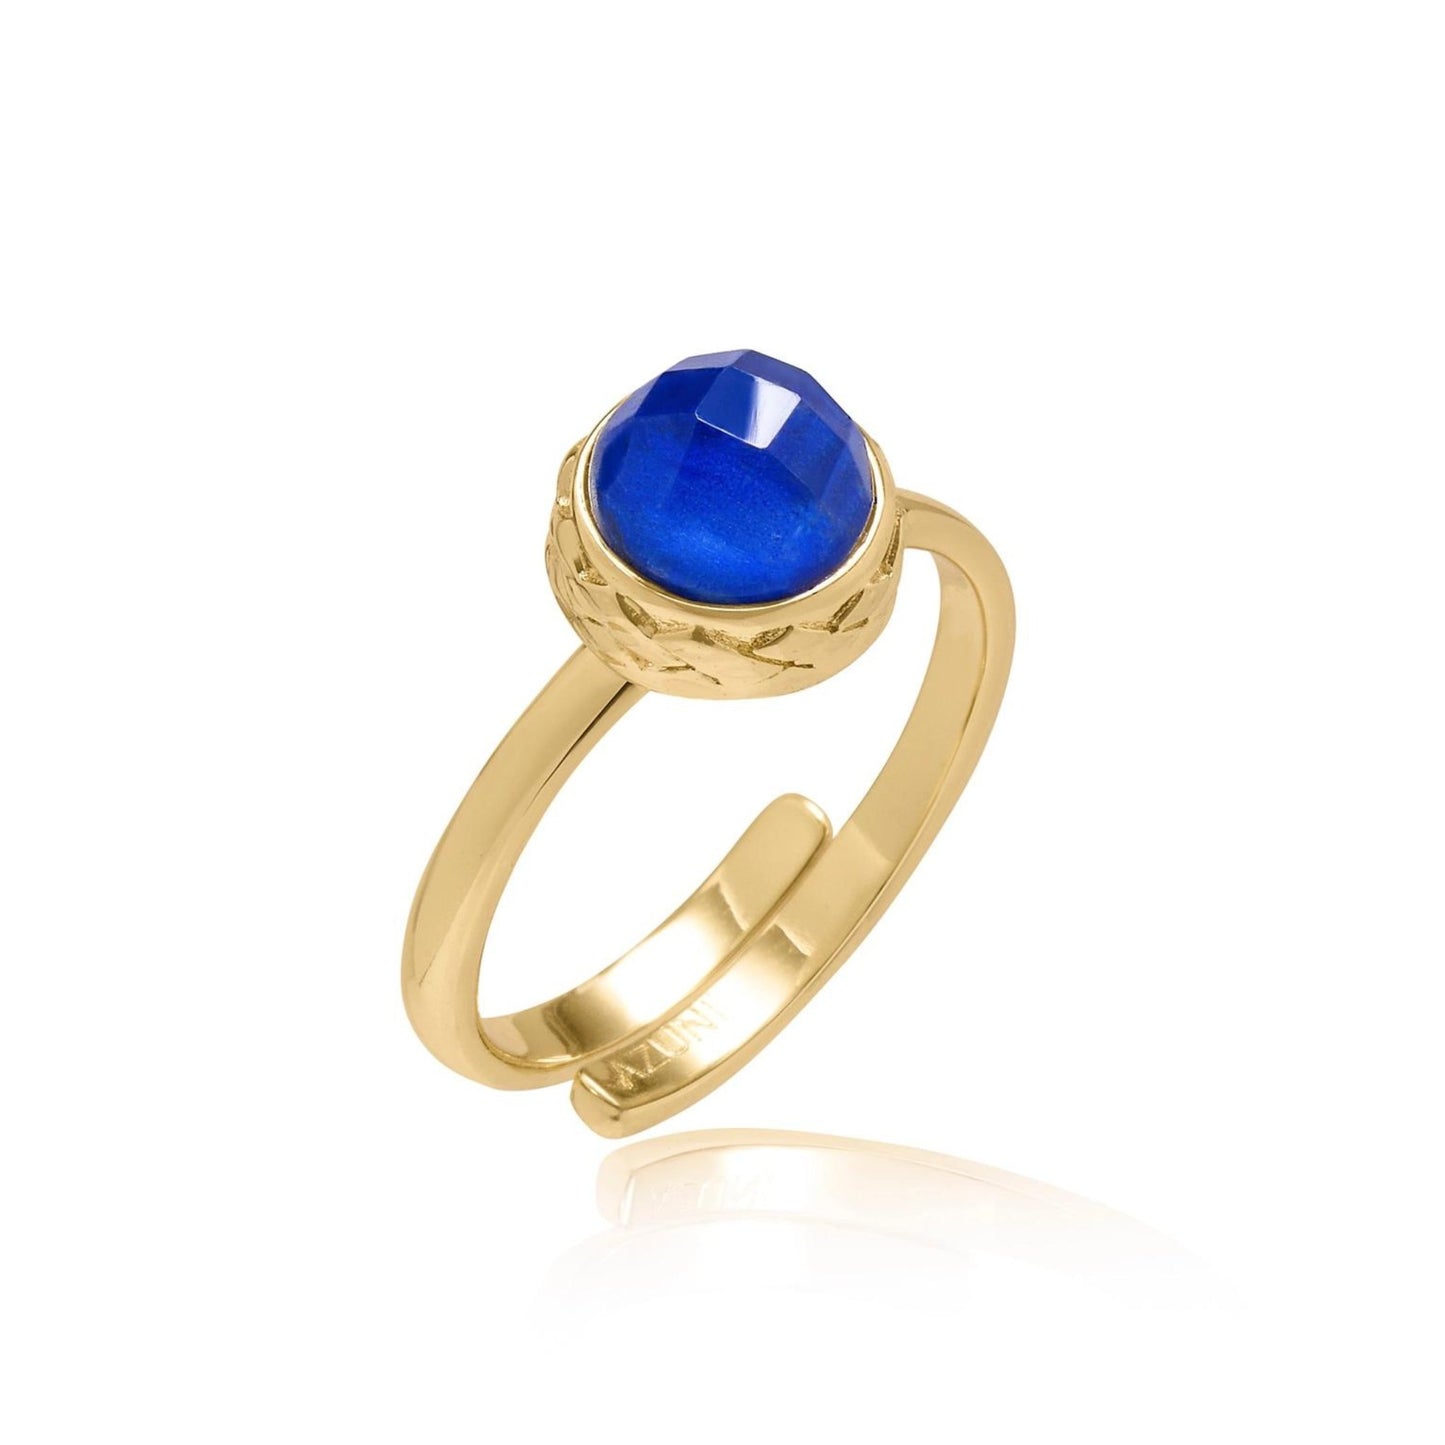 Apollo Gold Gemstone Doublet Ring With Lapis Lazuli - The Little Jewellery Company